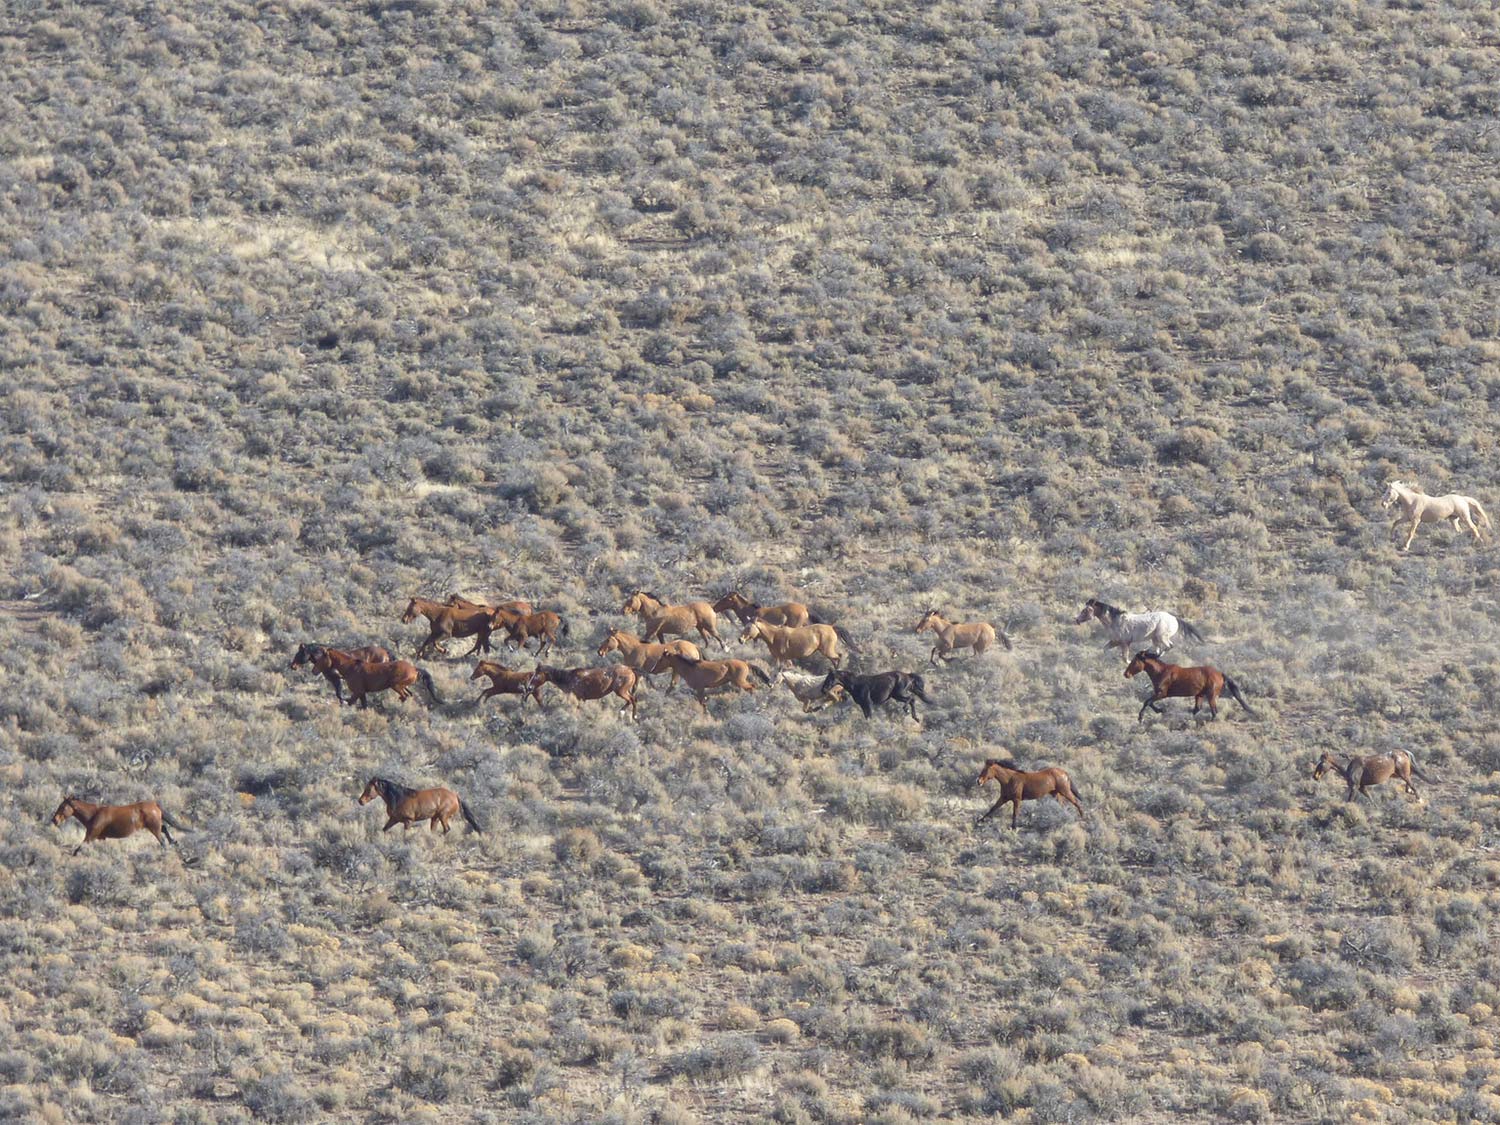 A herd of wild horses of the Beaty Butte herd roam across the large open plains of Oregon